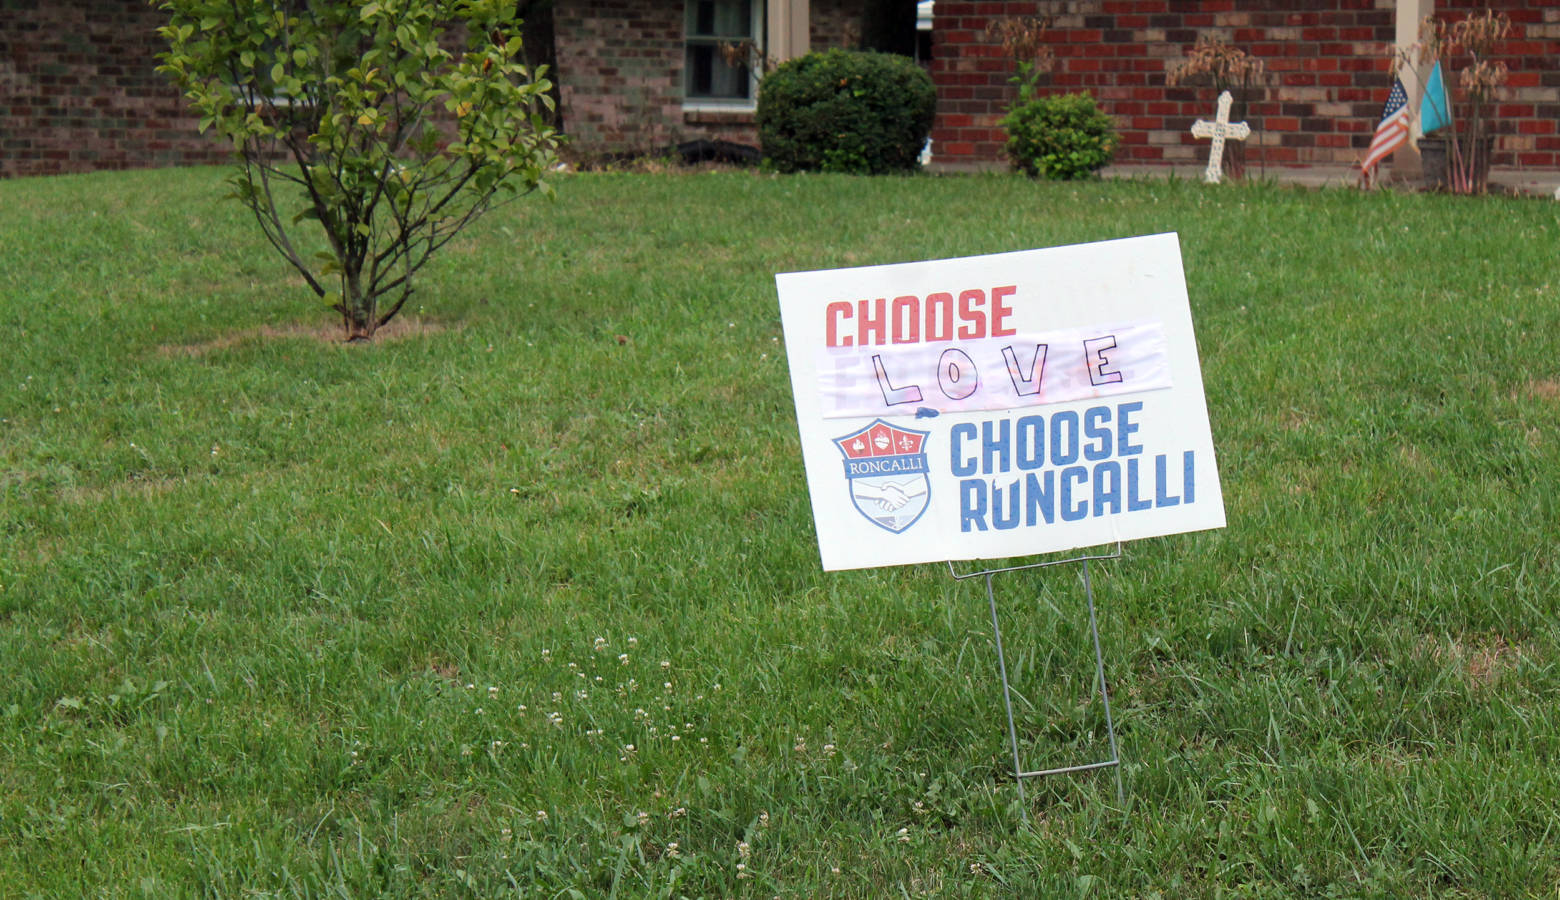 A sign from a house close to Roncalli High School protests the treatment of a guidance counselor. Shelly Fitzgerald's job has been threatened by the school over her marriage to a woman. (Lauren Chapman/IPB News)